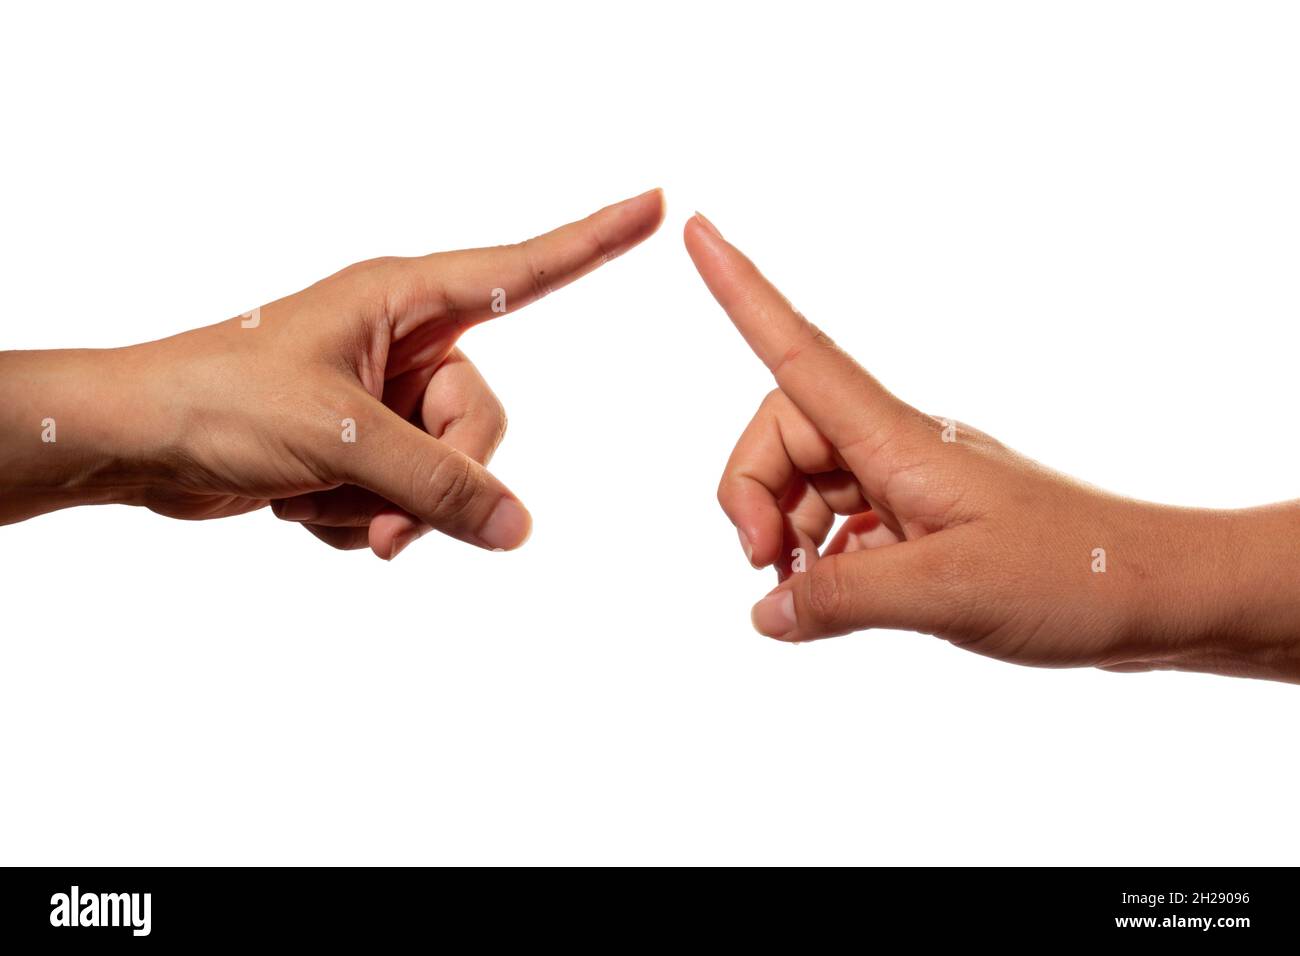 Two hands stretching out their index finger to touch each other. Two fingers about to touch. Union of fingers, isolated on white background. Stock Photo